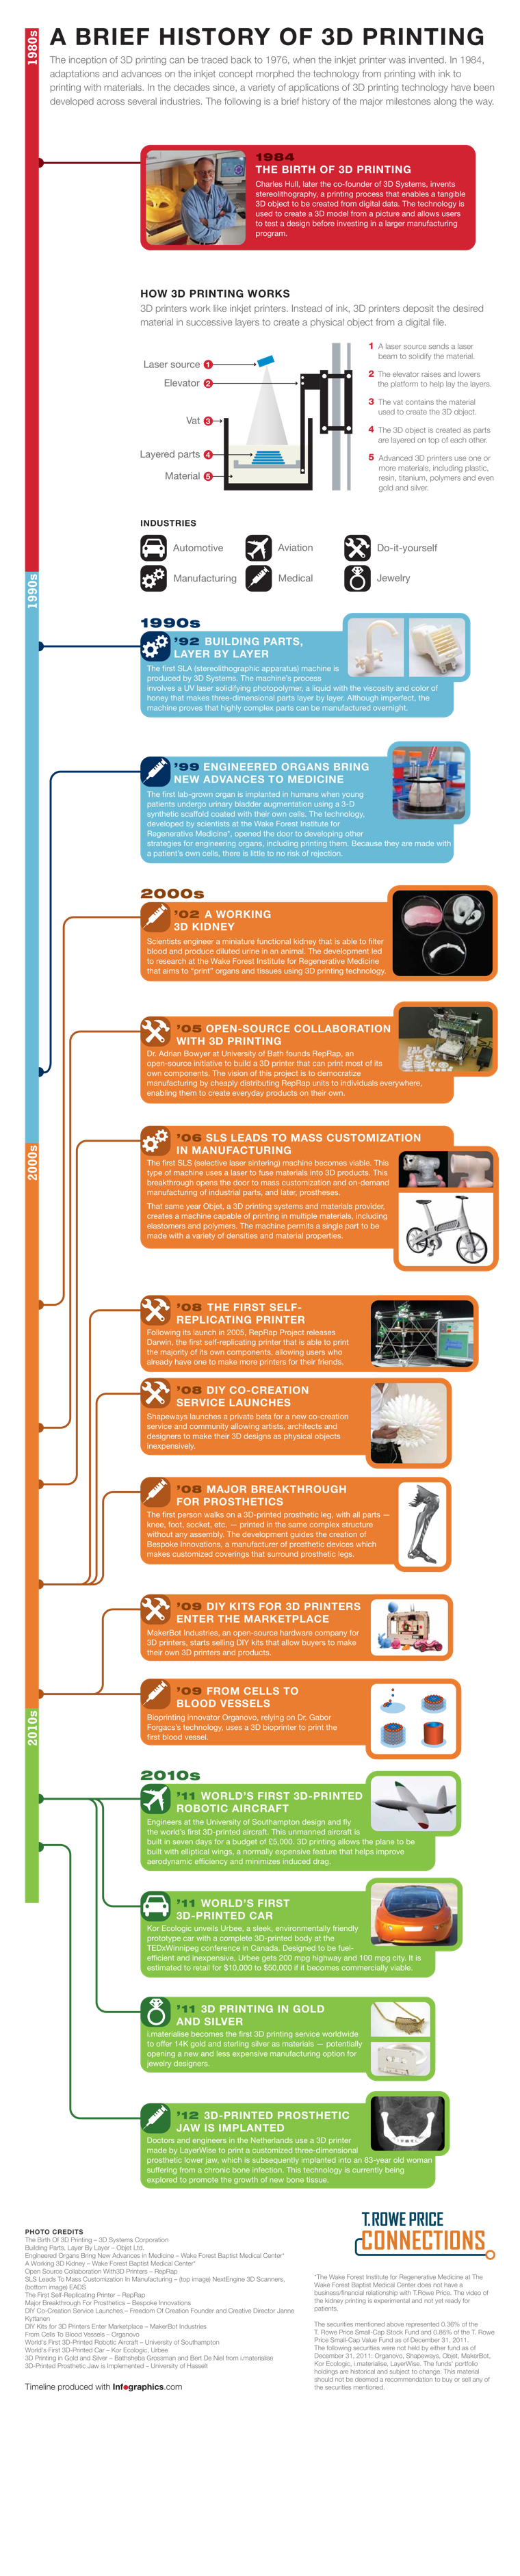 The History of 3D Printing [#Infographic] - StateTech